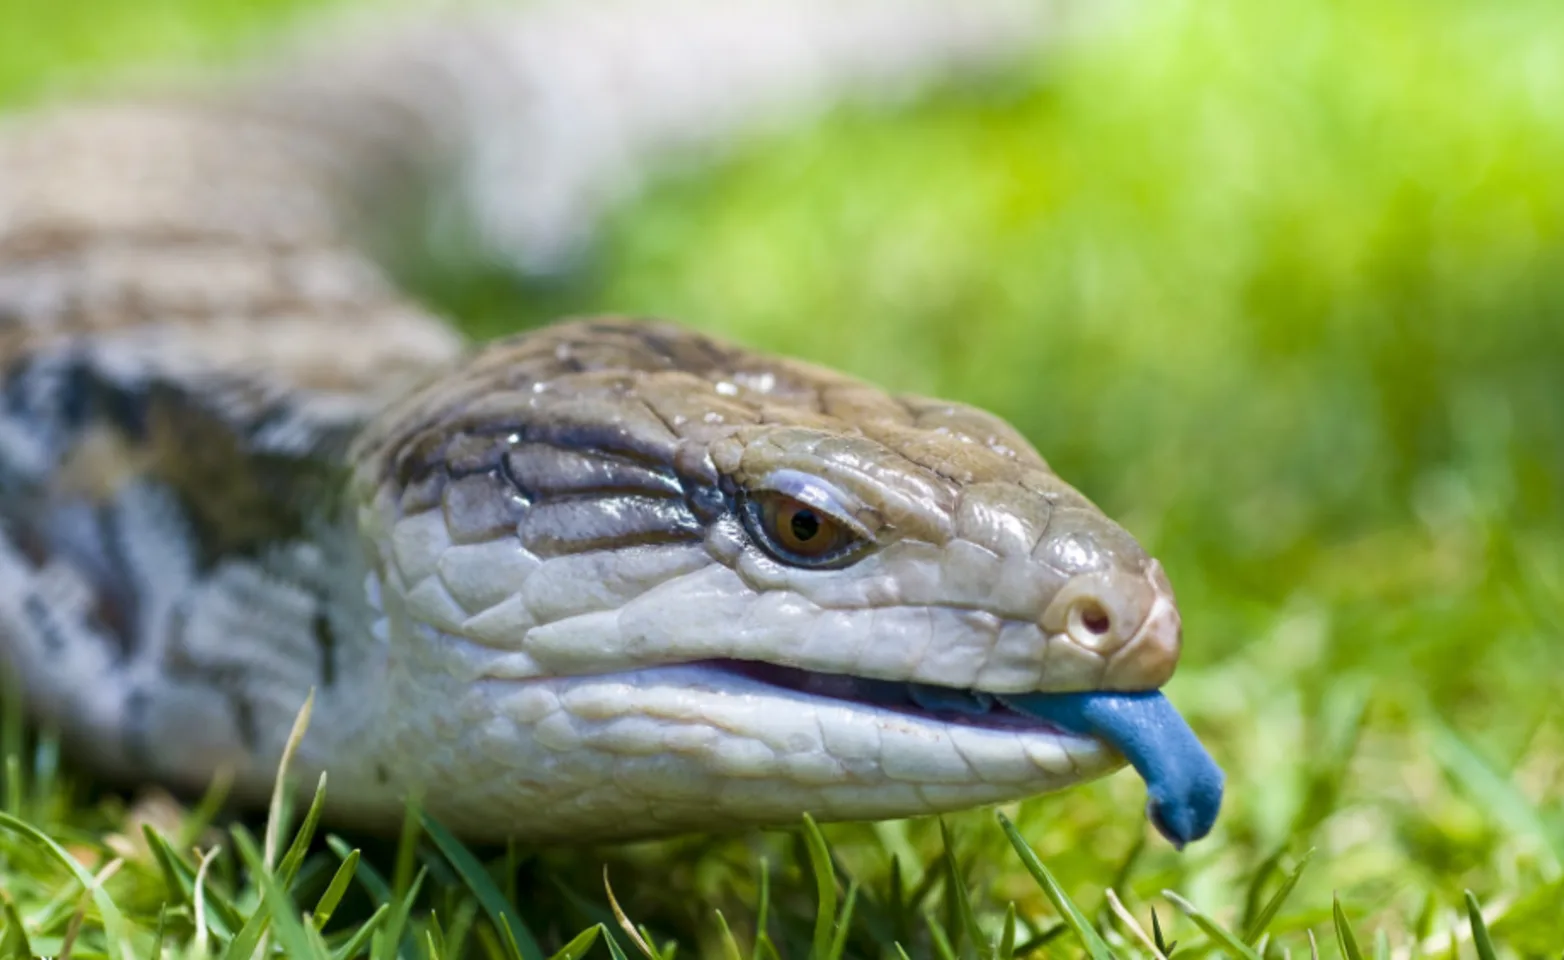 Gray lizard in grass with a blue tongue